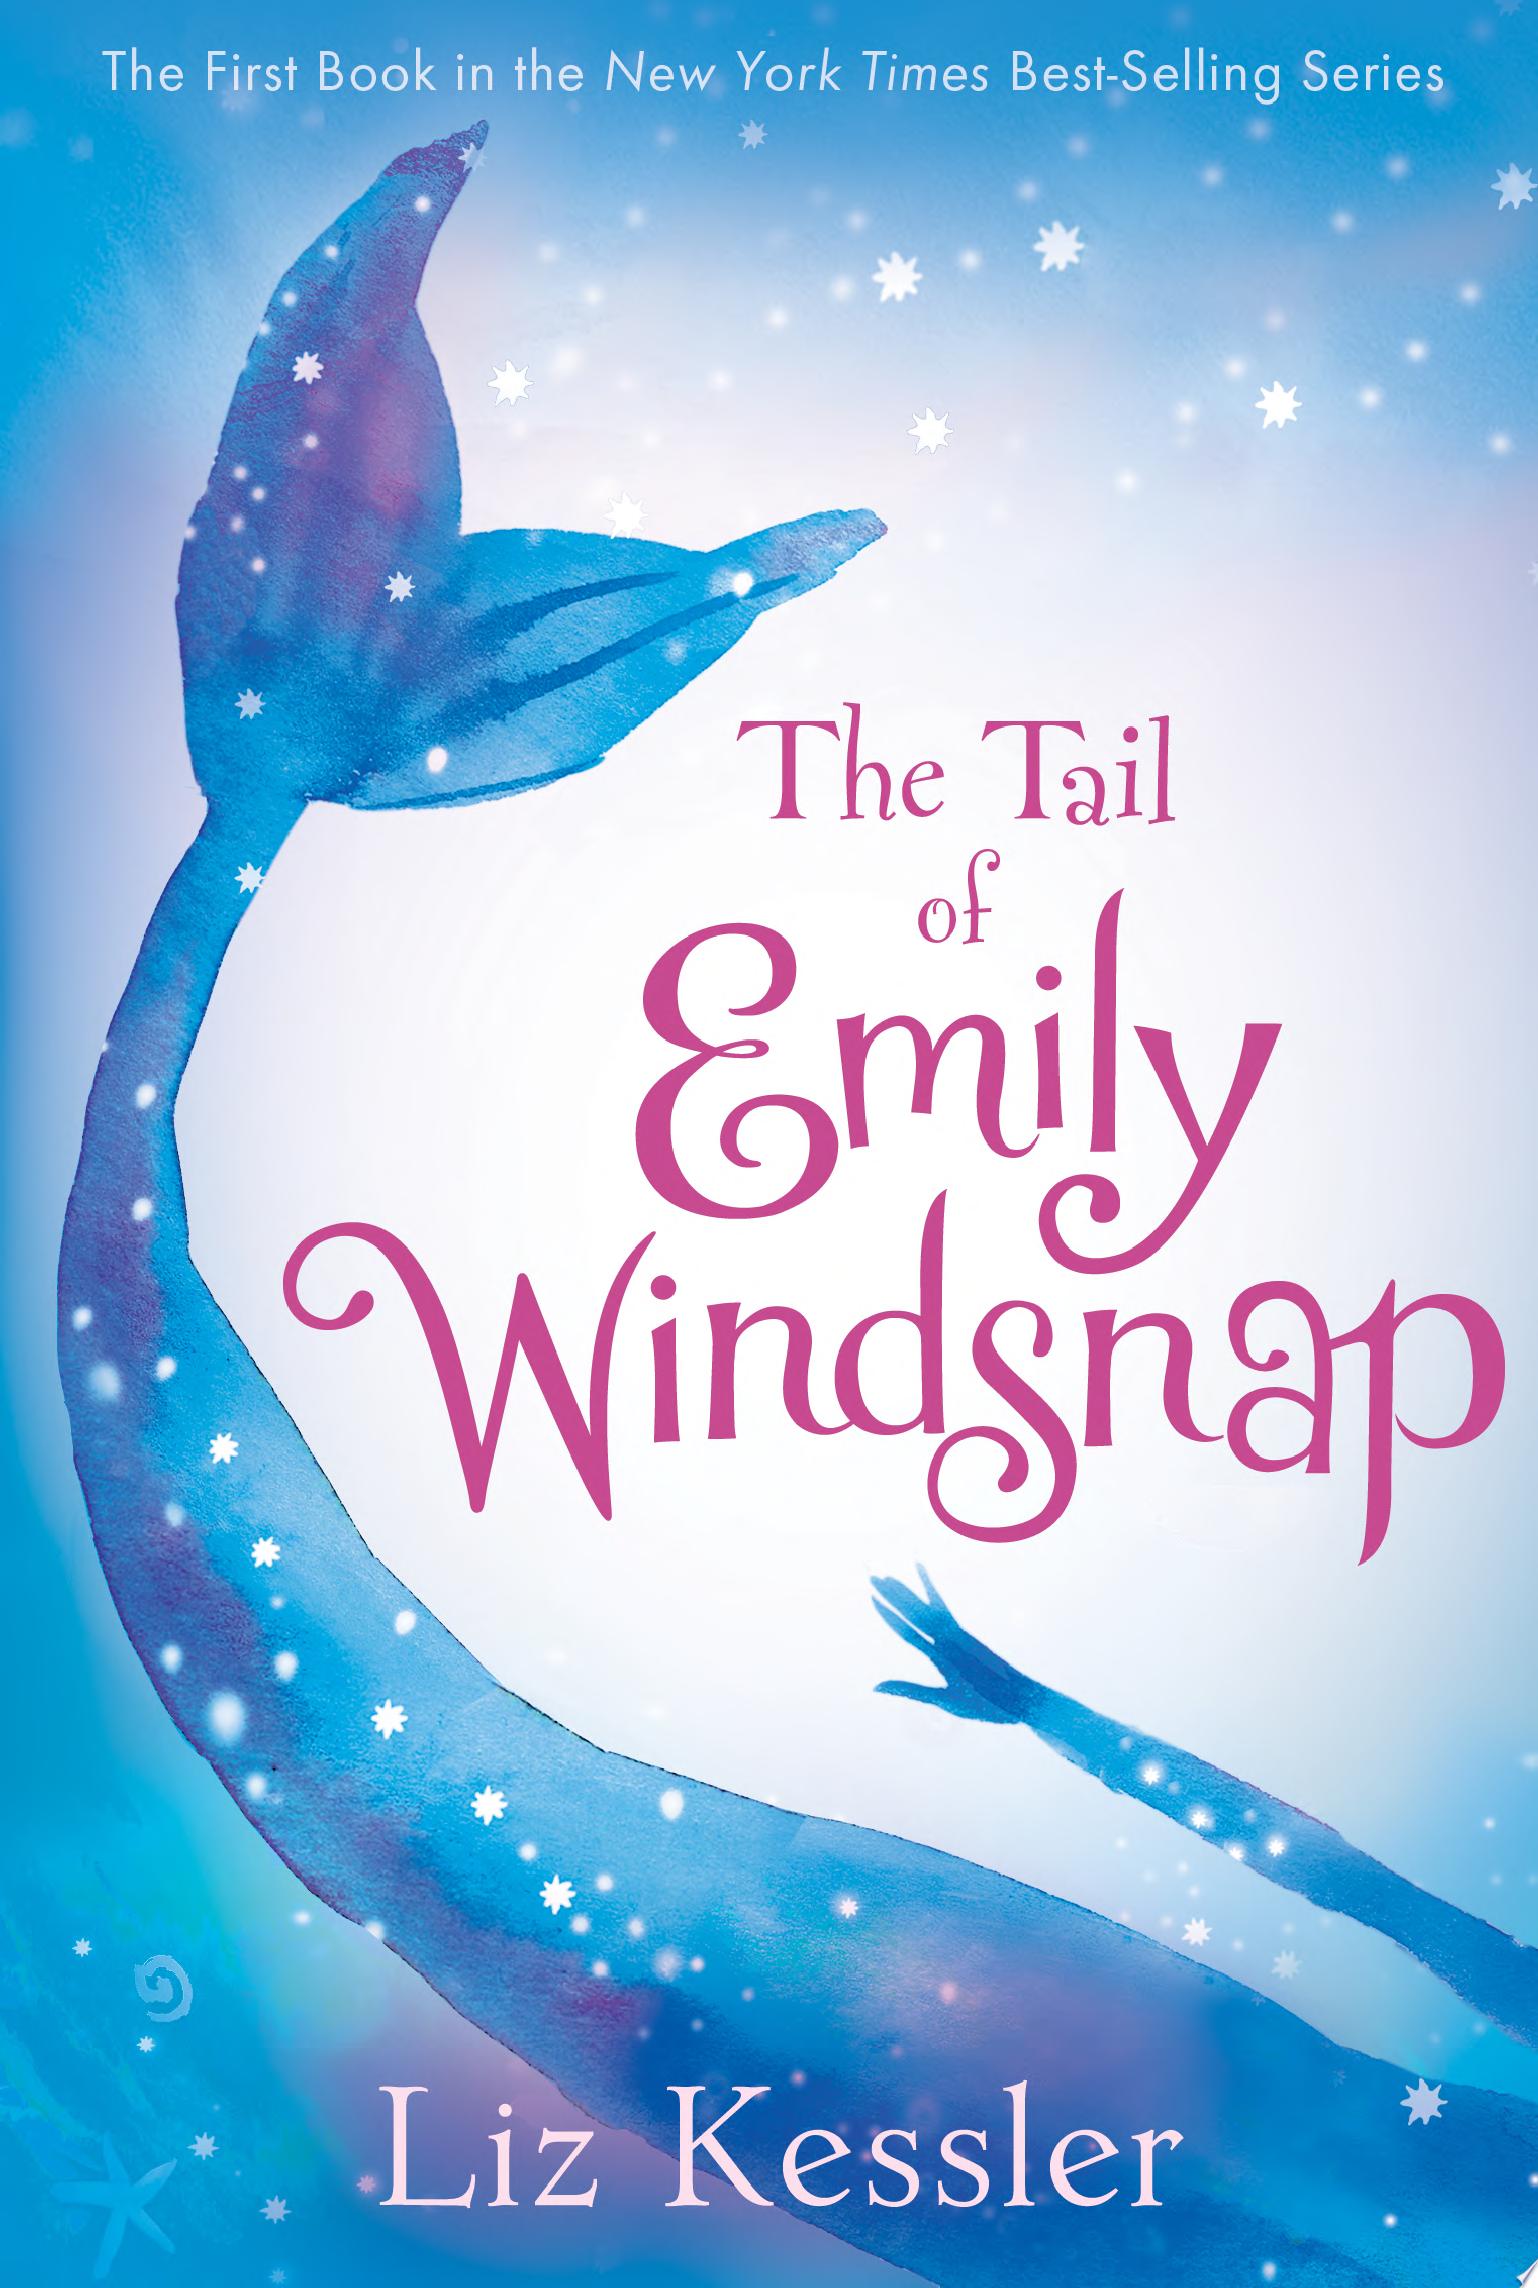 Image for "The Tail of Emily Windsnap"